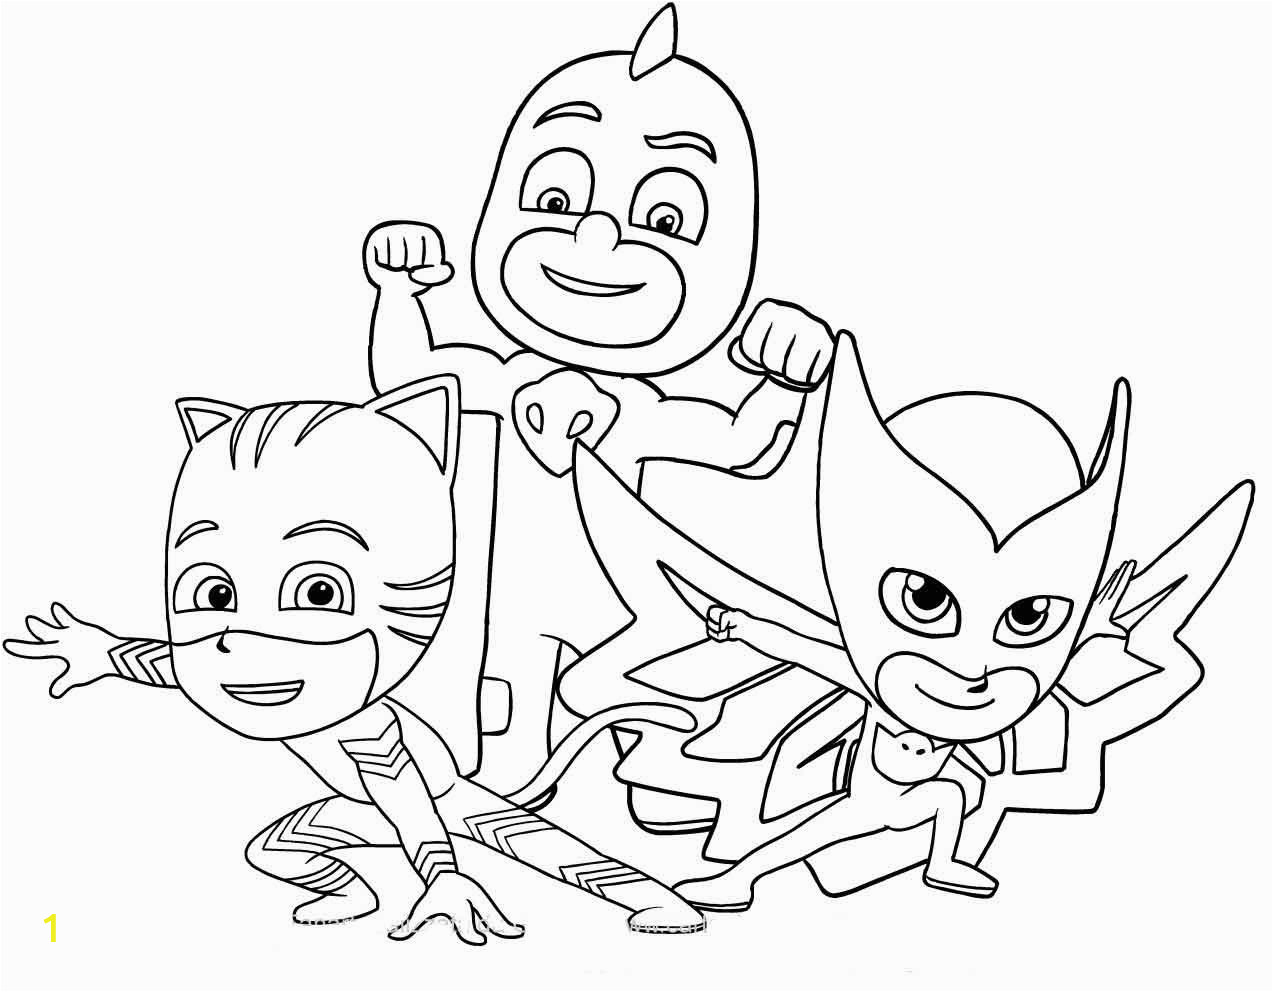 printable pj masks coloring pages games free for kids to print pictures